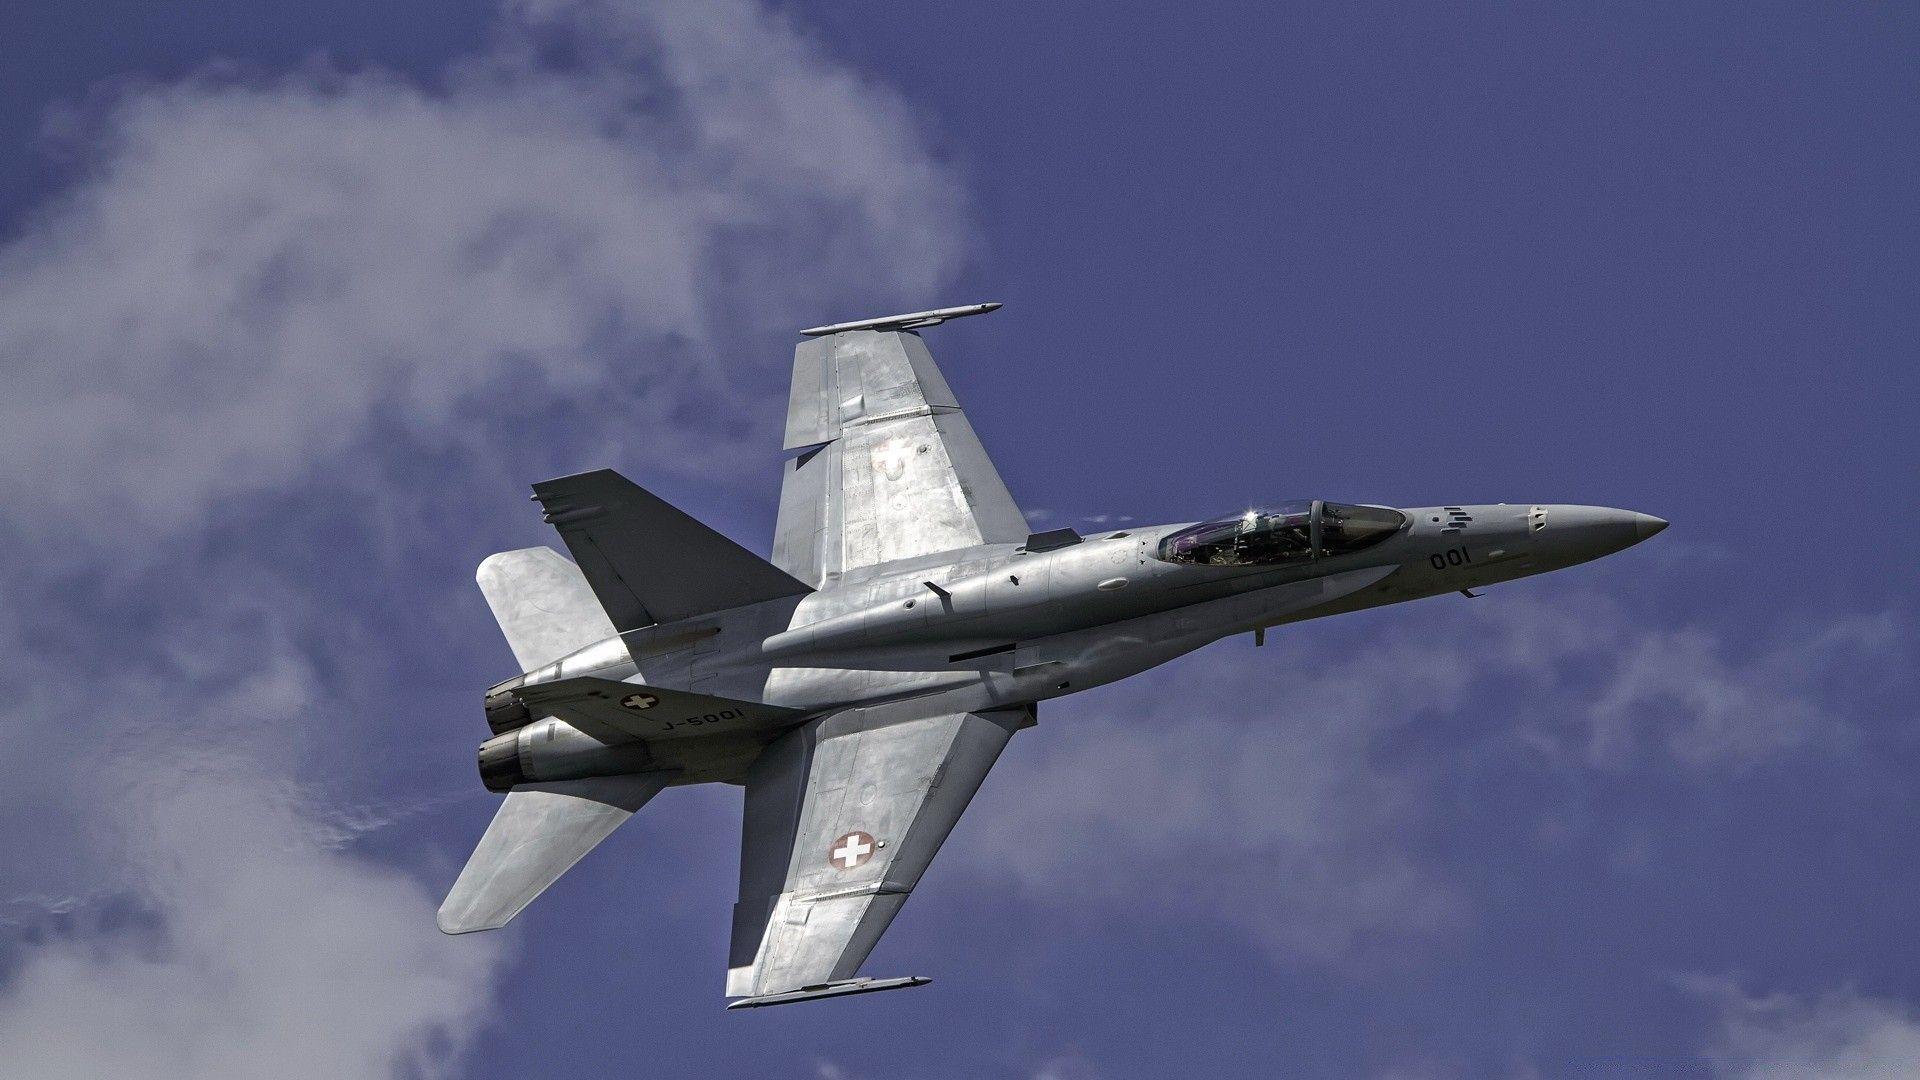 Swiss Aviation F18. Android wallpaper for free